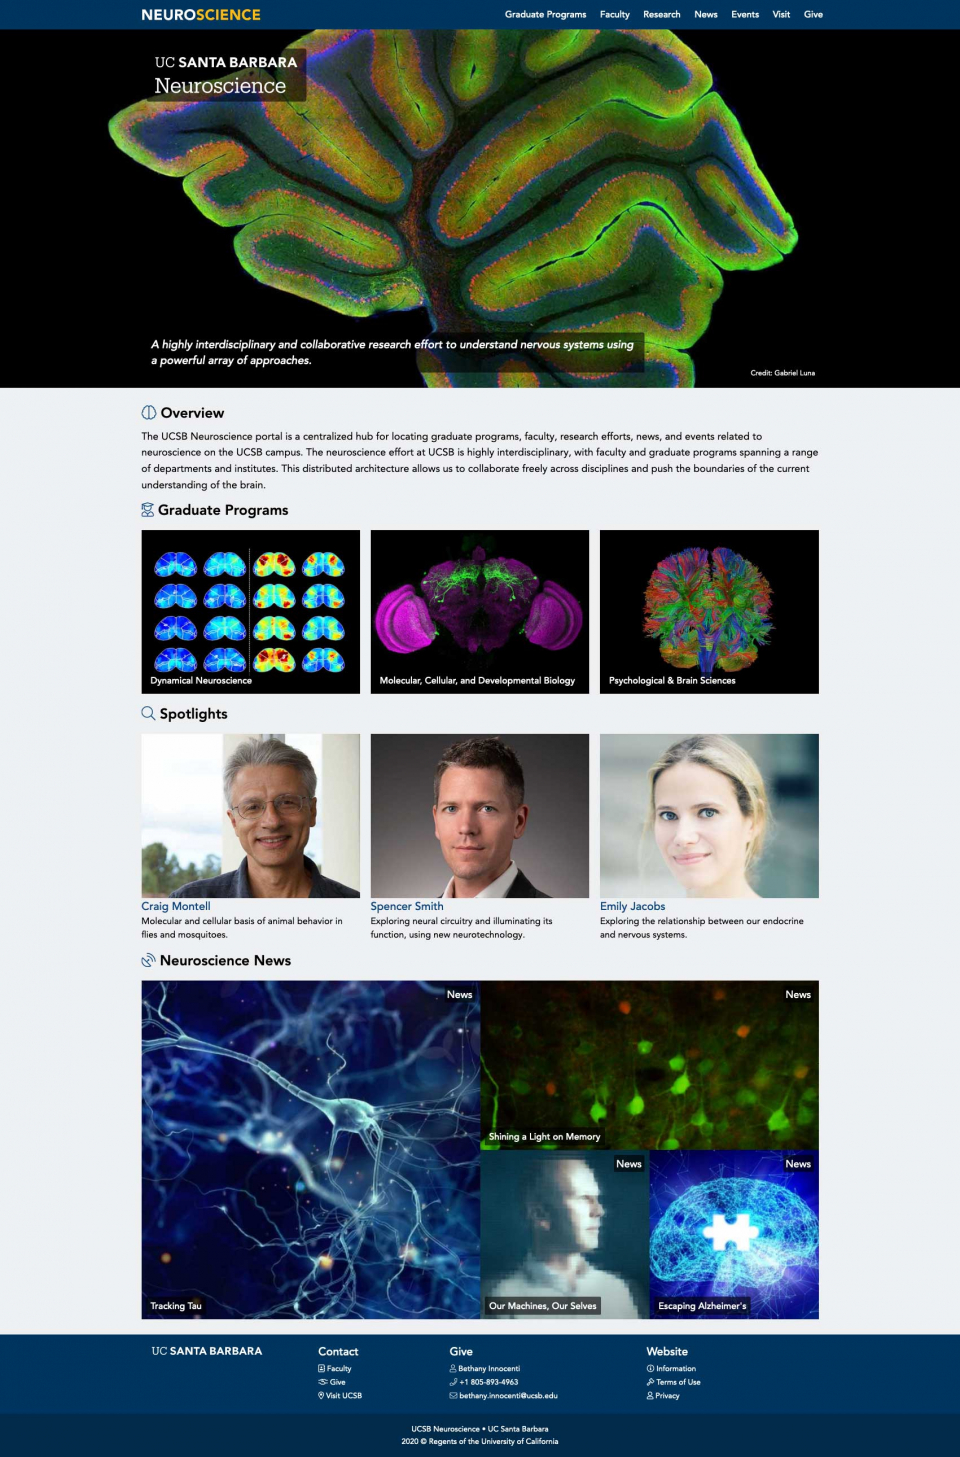 UCSB Neuroscience Front Page